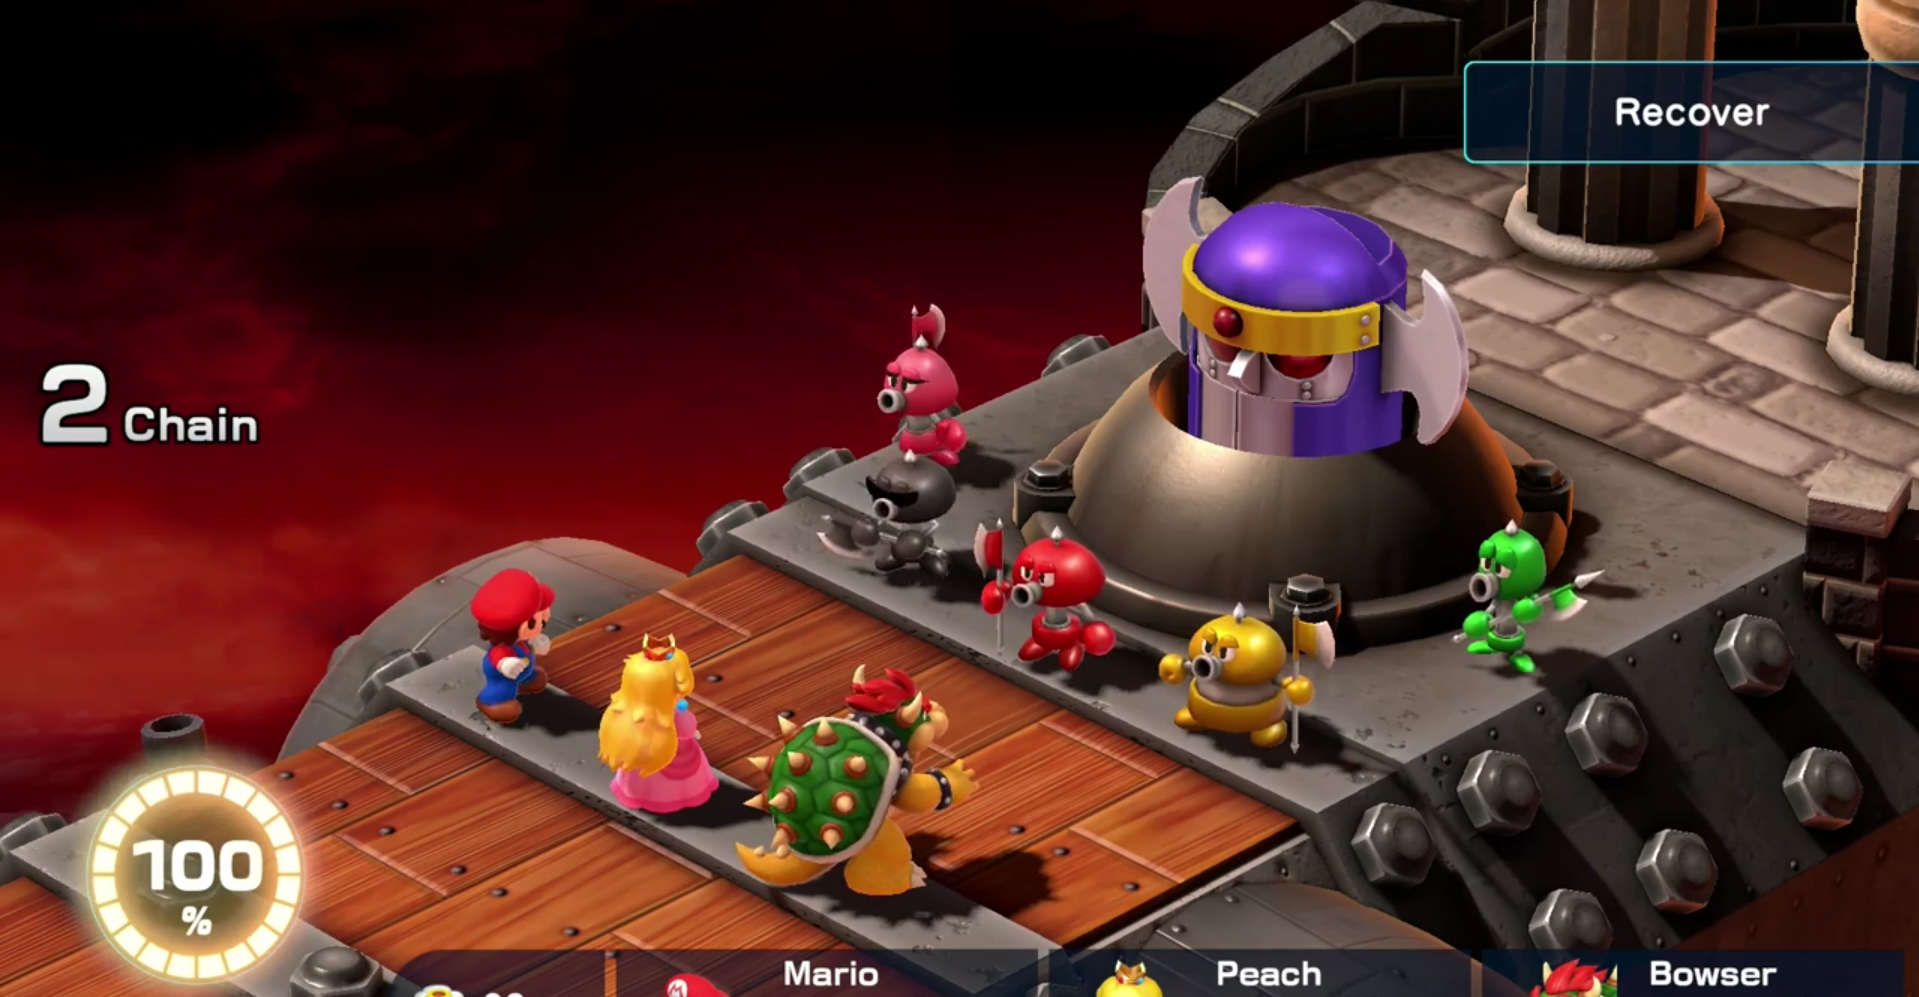 Axem Pink using Recover in Super Mario RPG.